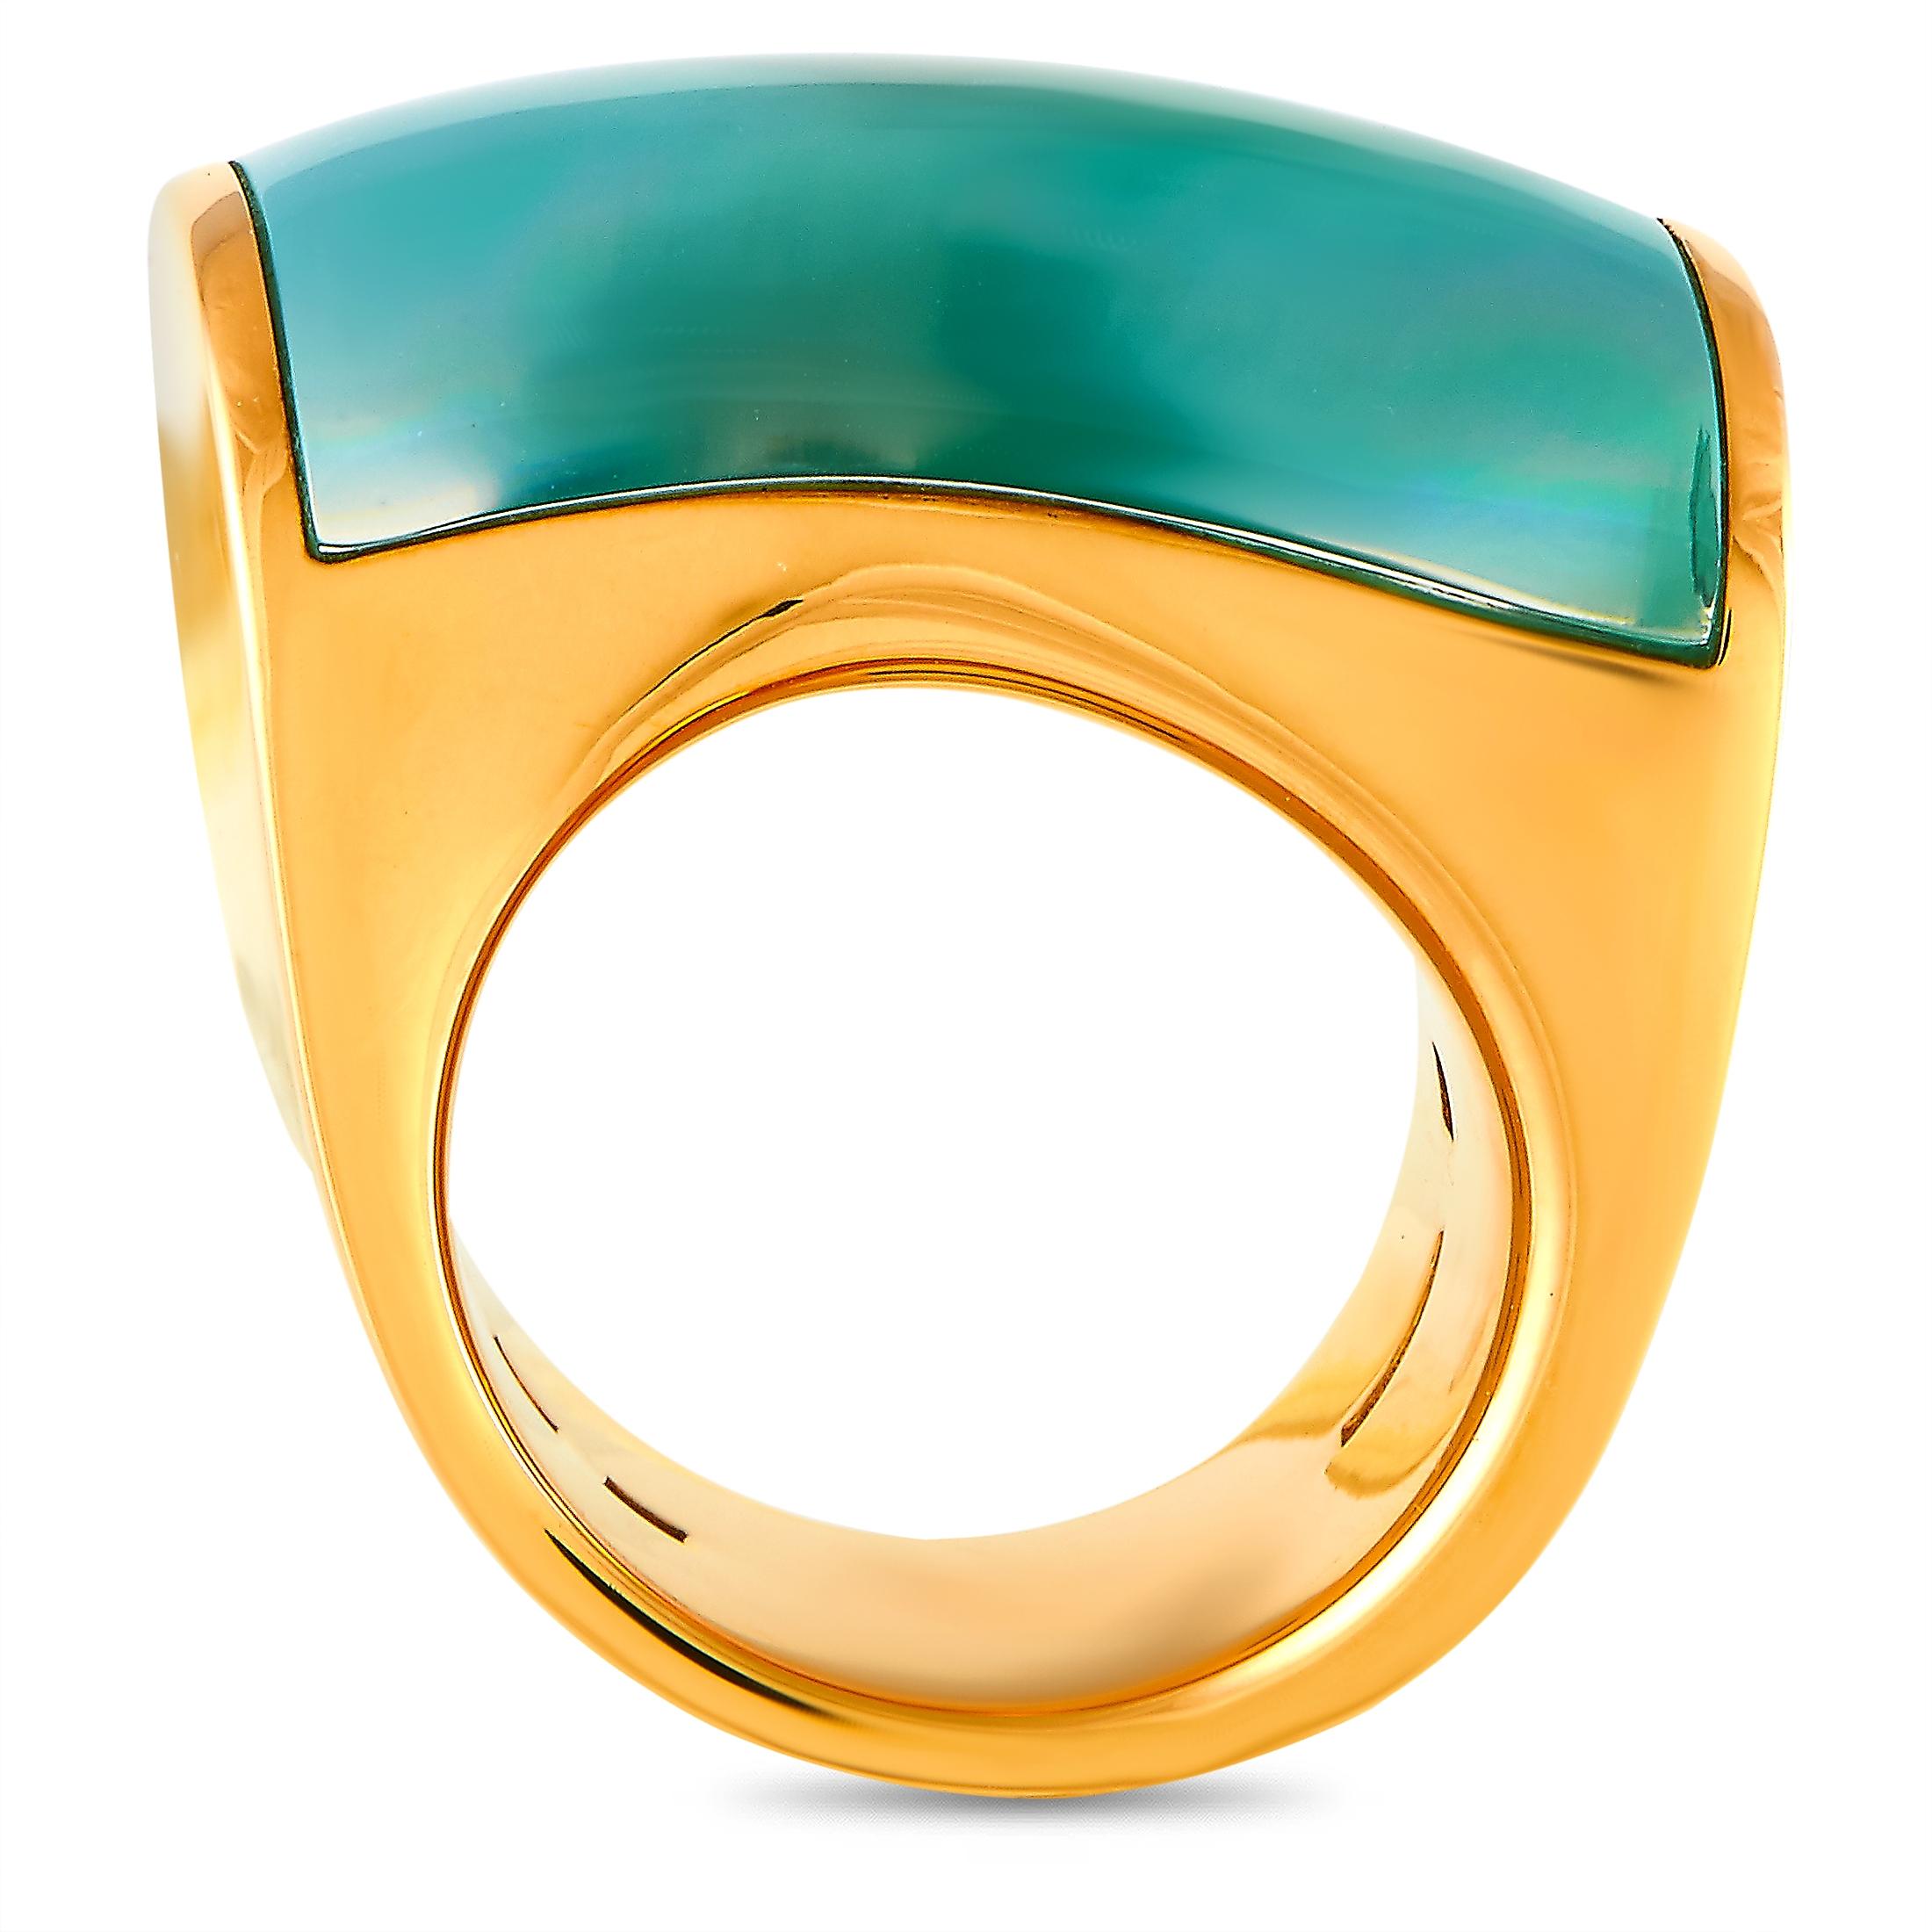 The Vhernier “Onda Grande” ring is crafted from 18K rose gold and set with mother of pearl, chrysoprase, and rock crystal. The ring weighs 30 grams and boasts band thickness of 16 mm and top height of 9 mm, while top dimensions measure 25 by 16